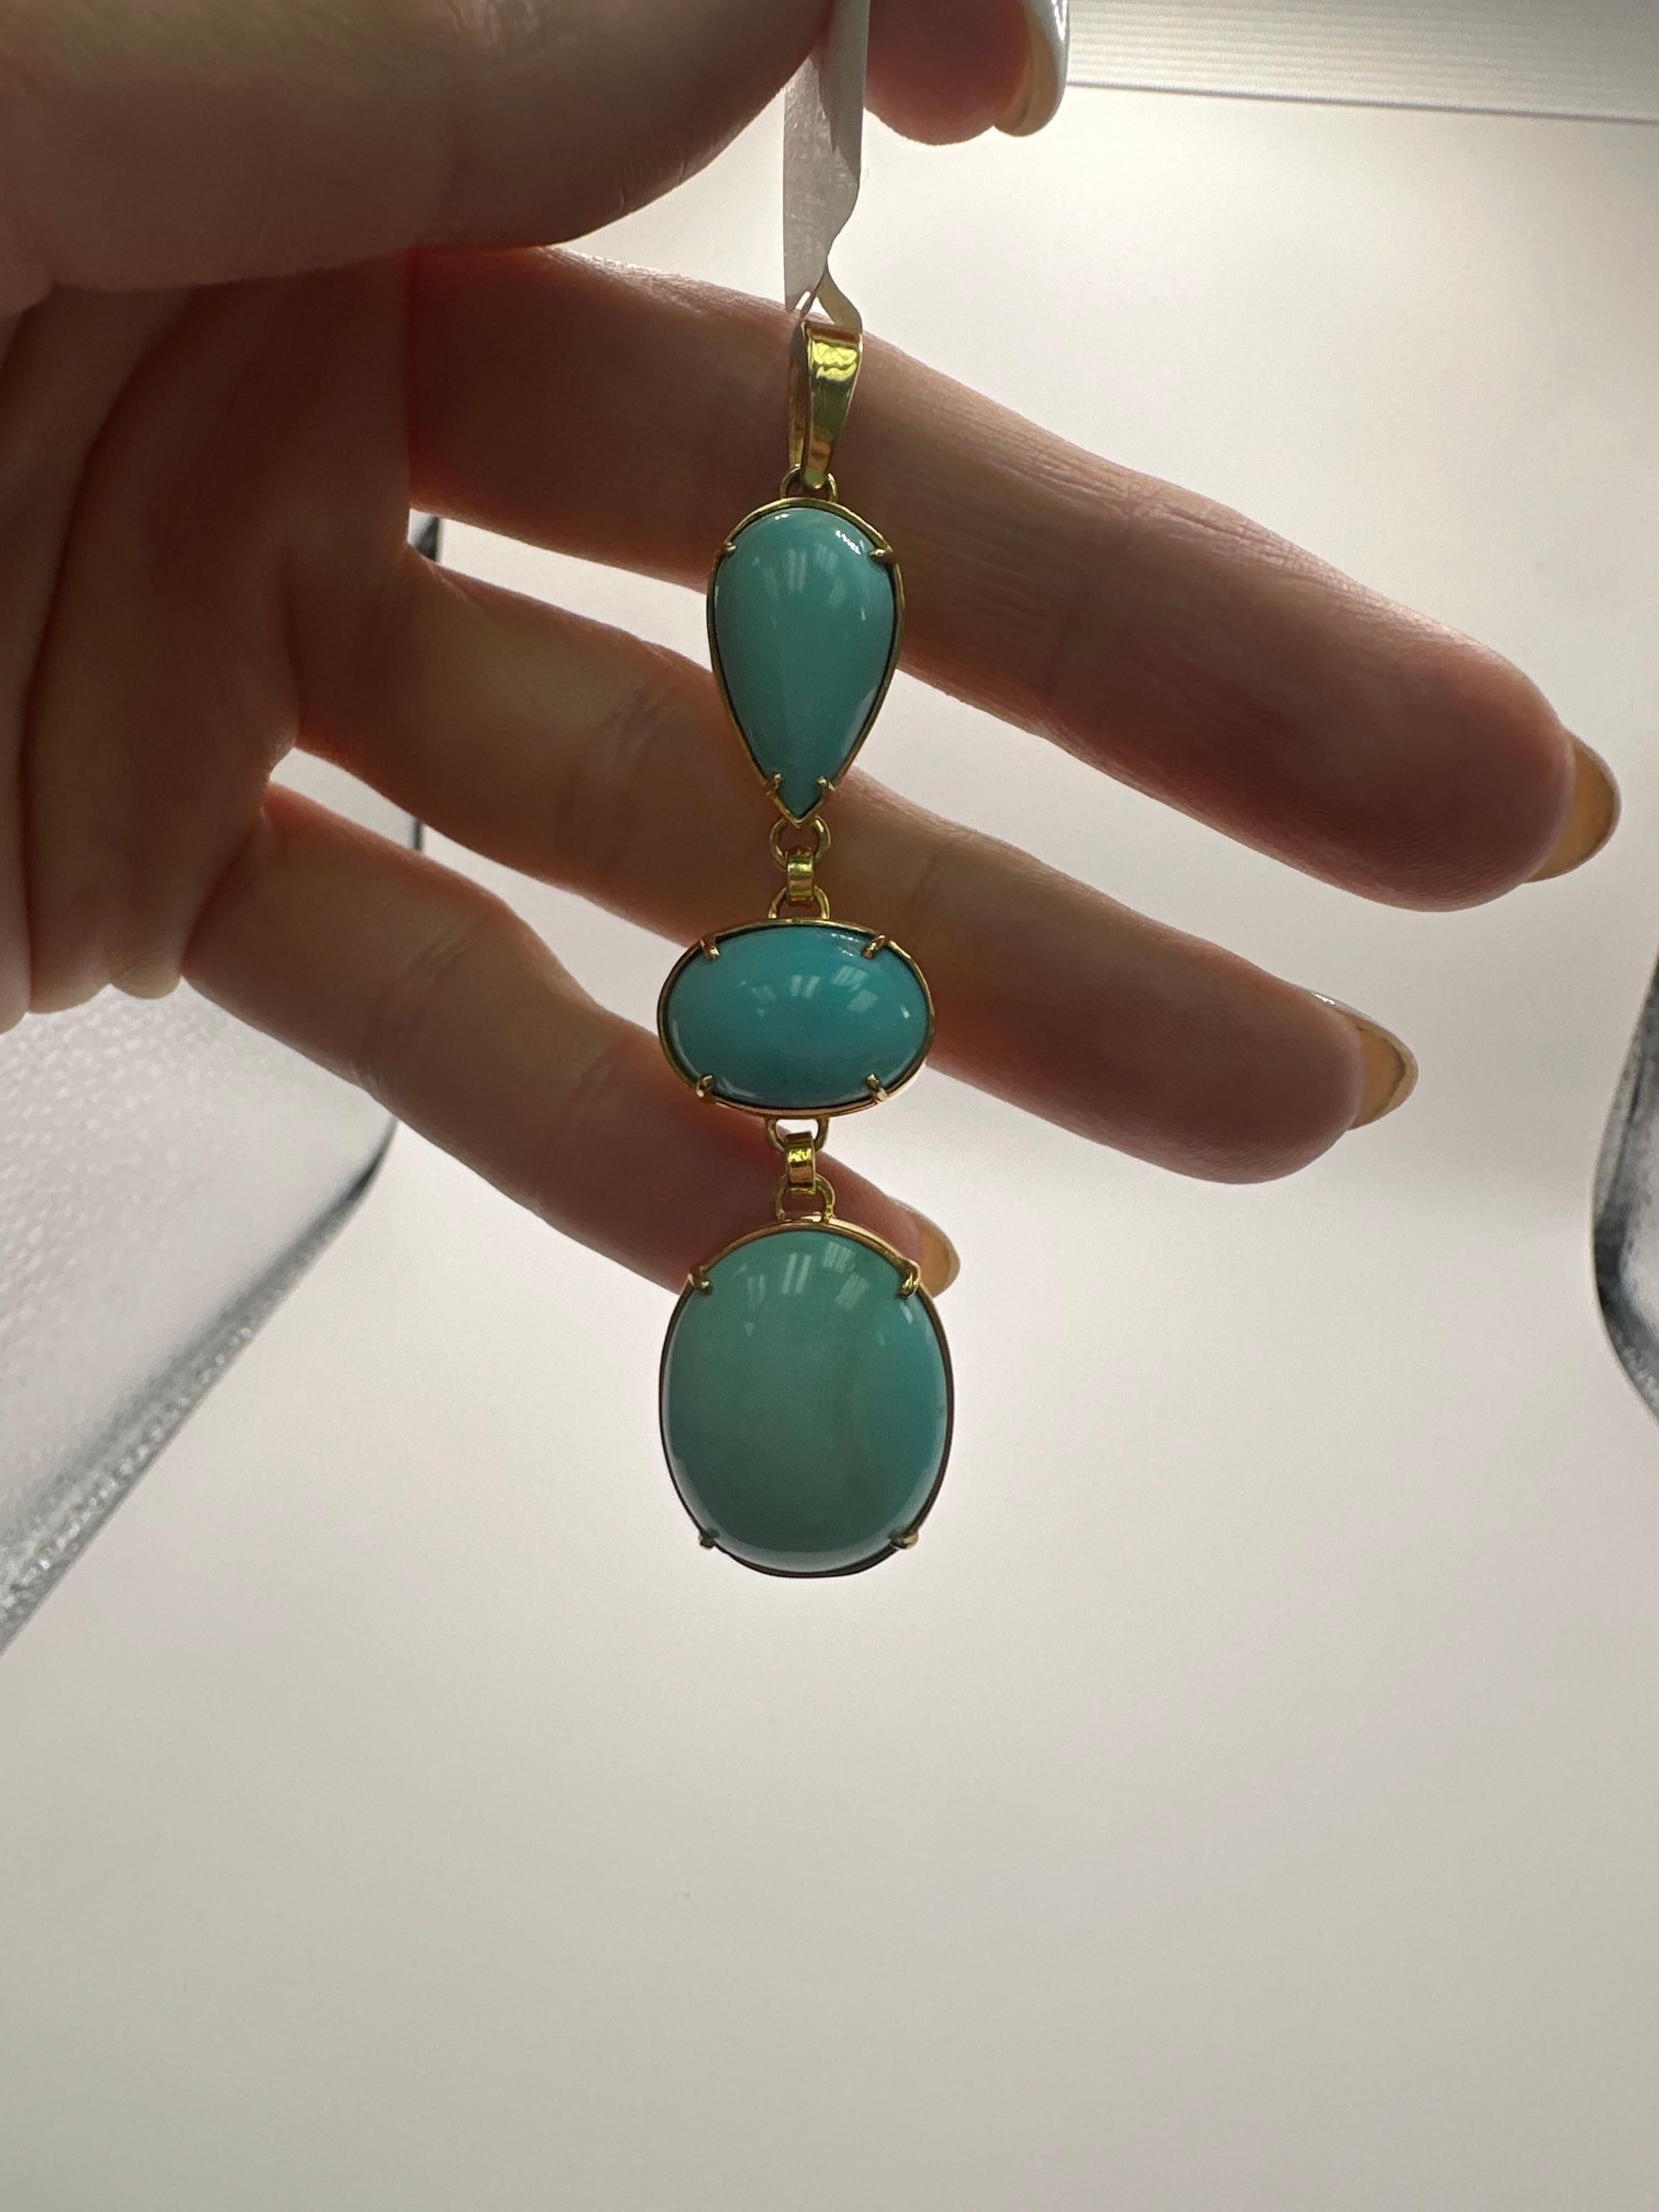 Oval Cut Persian Turquoise pendant necklace long 18KT solid gold For Sale